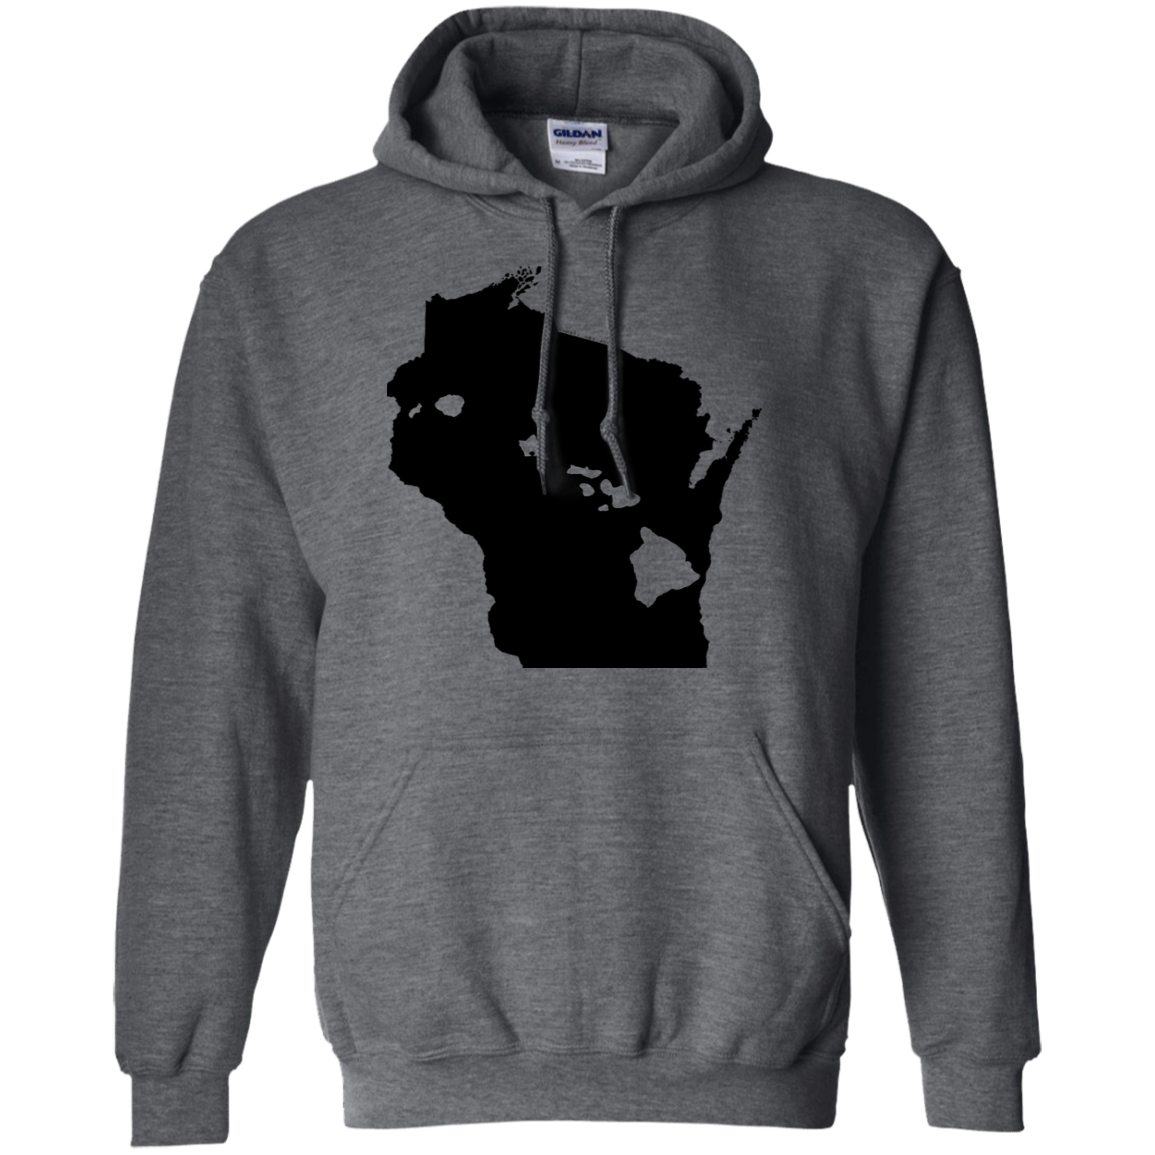 Living in Wisconsin with Hawaii Roots Pullover Hoodie 8 oz., Sweatshirts, Hawaii Nei All Day